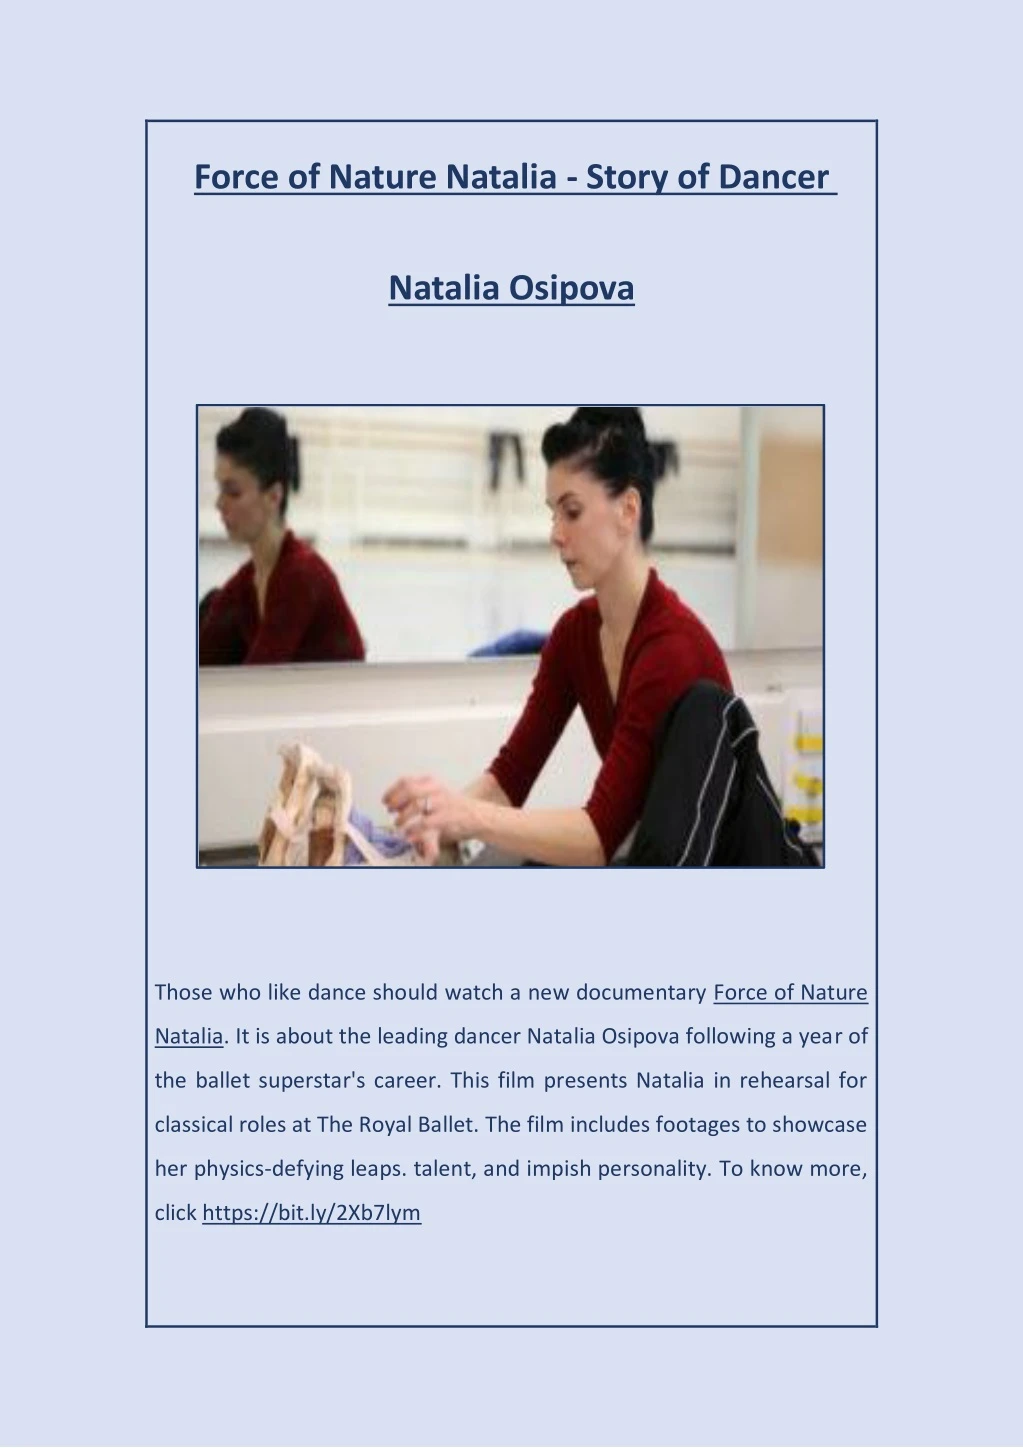 force of nature natalia story of dancer